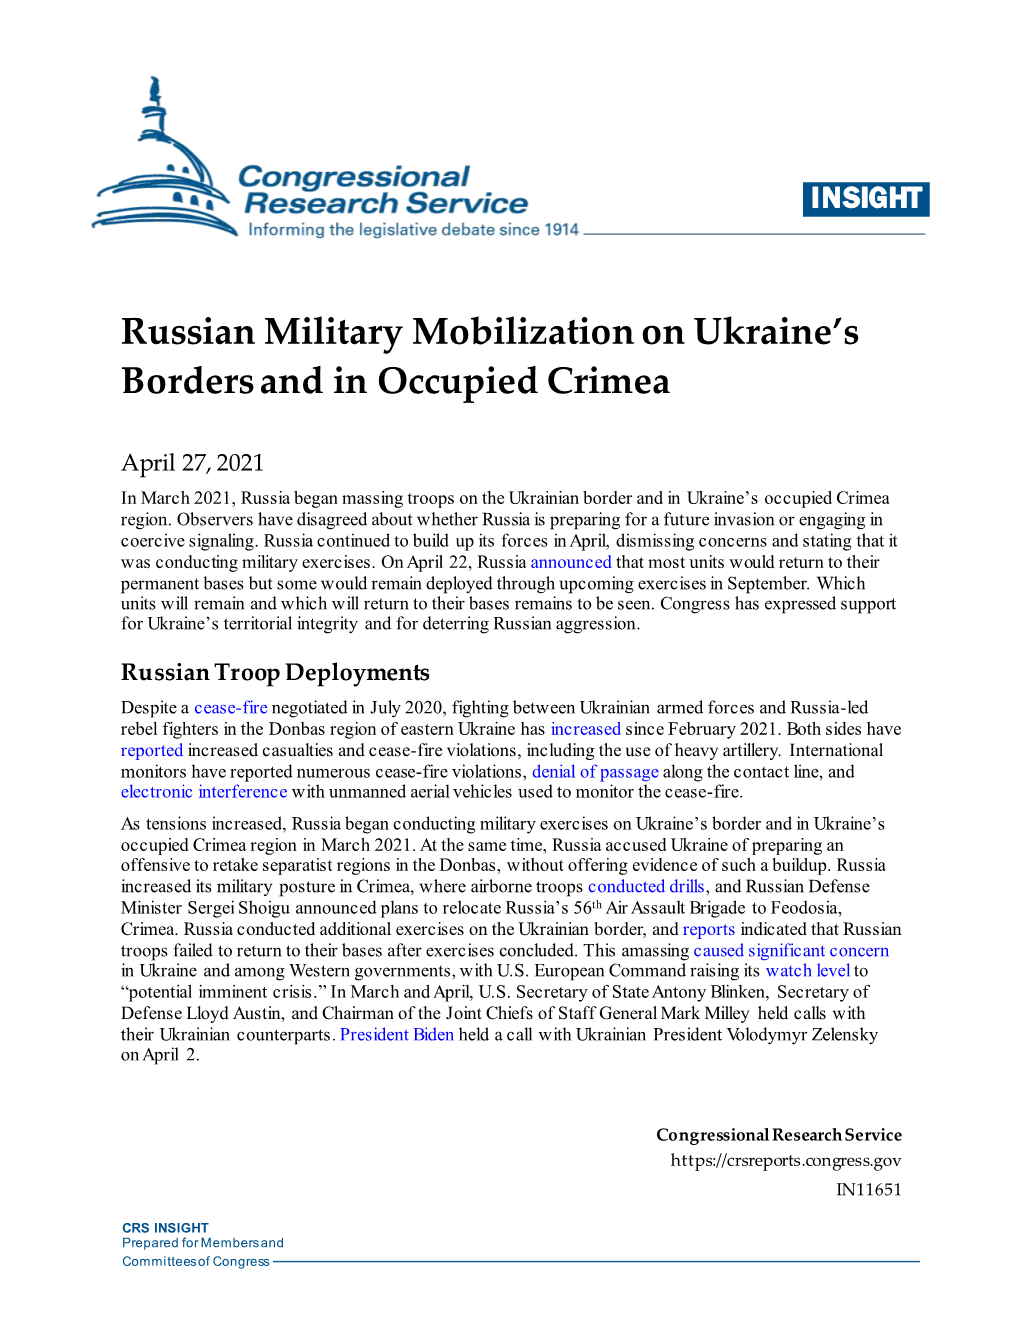 Russian Military Mobilization on Ukraine's Borders and in Occupied